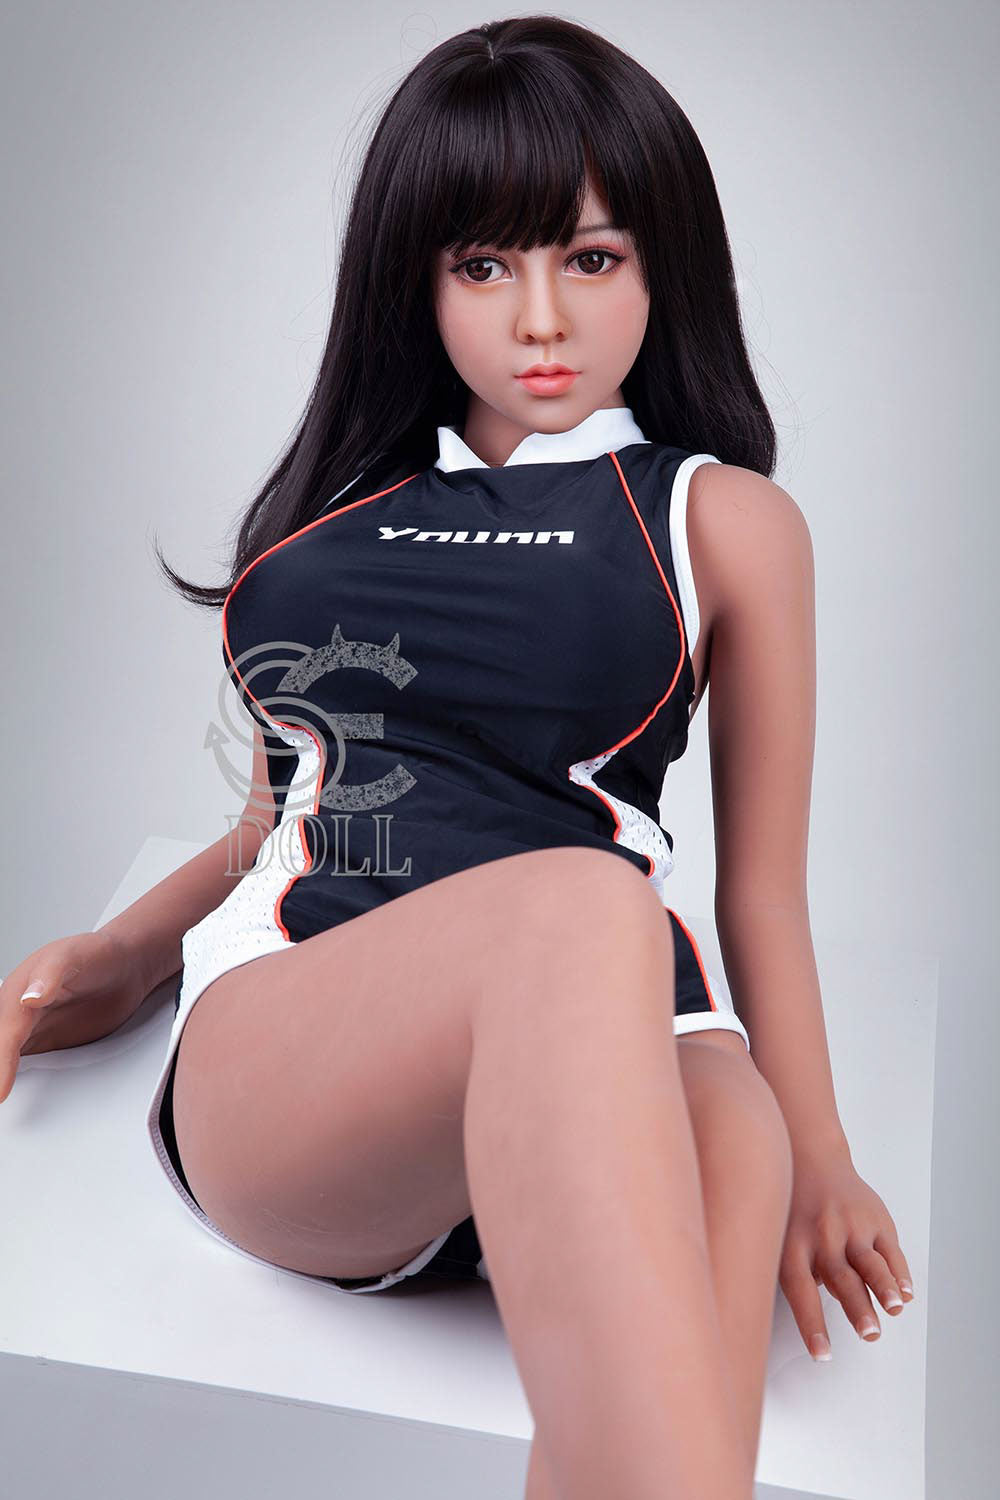 SEDOLL 150cm(4ft9) G-cup TPE Sex Doll   Candice